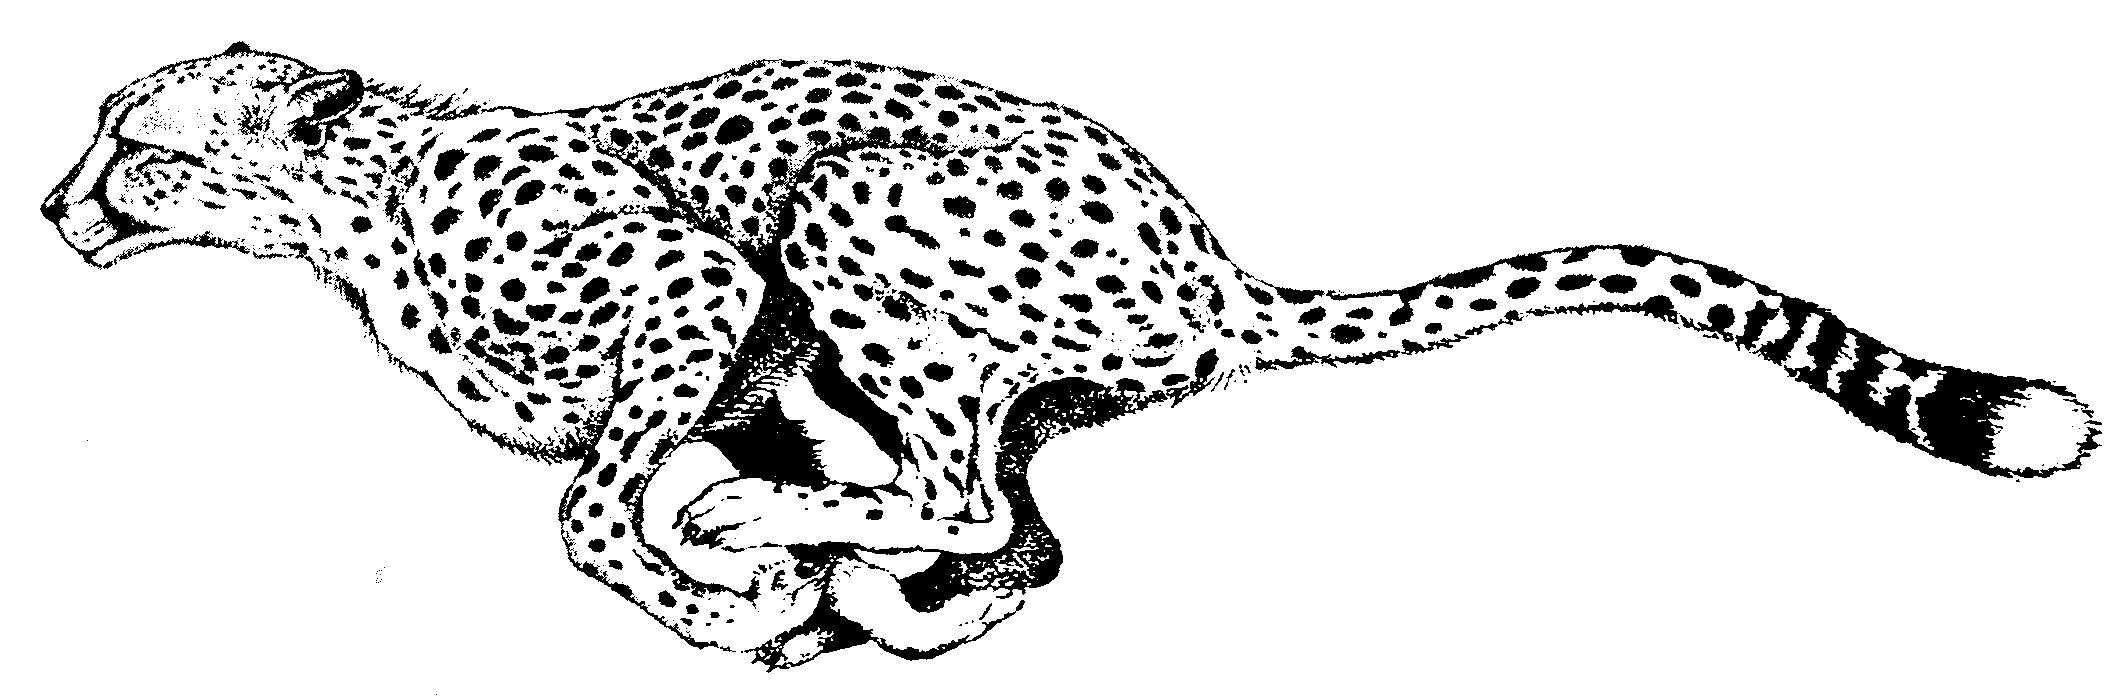 cheetah coloring pages to print - High Quality Coloring Pages